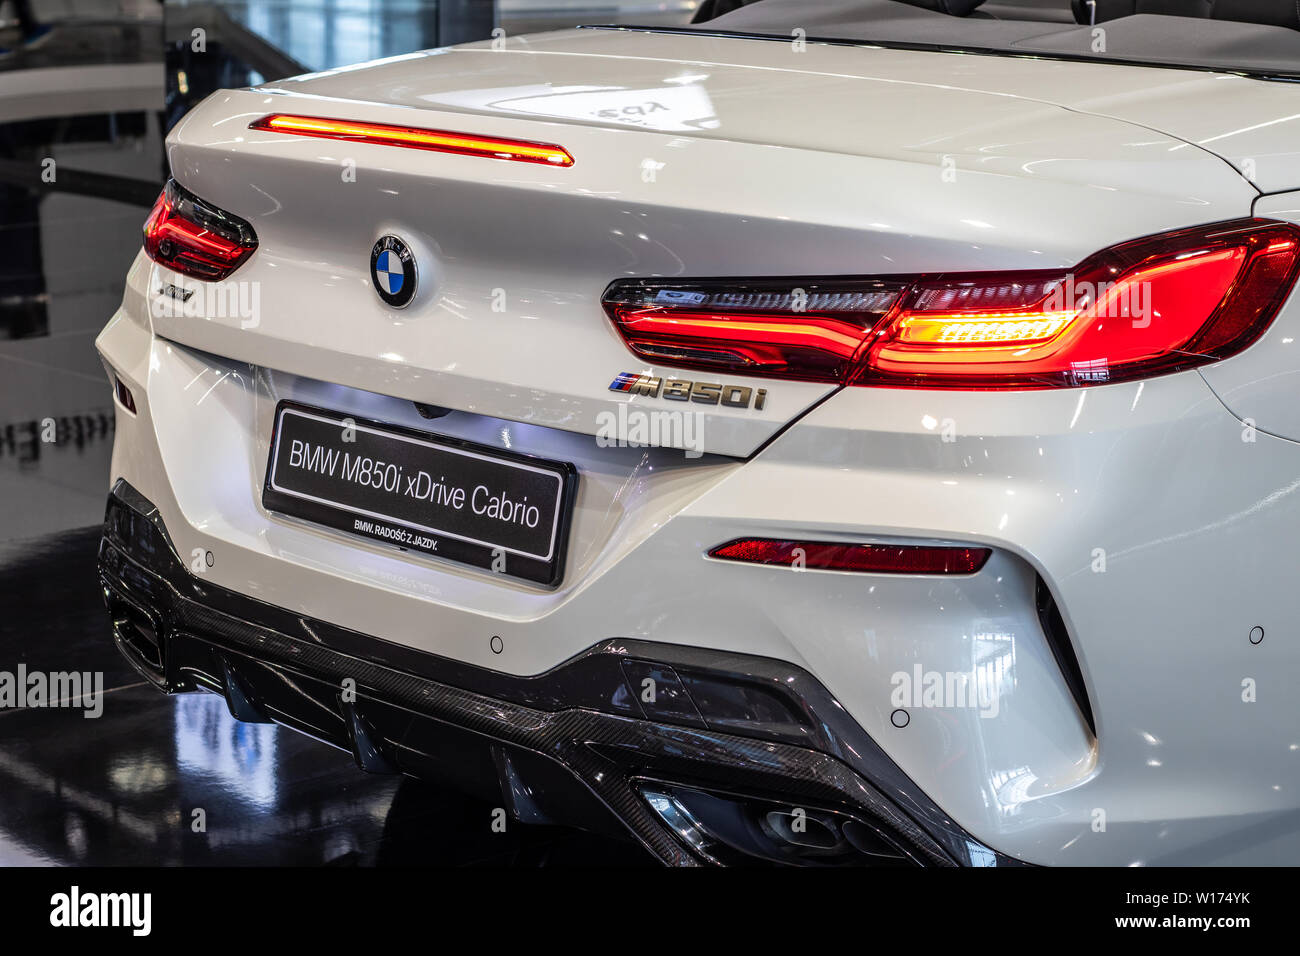 Poznan, Poland, March 2019: BMW The 8 Series xDrive Cabrio 850i, Poznan International Motor Show, G14 cabriolet car manufactured and marketed by BMW Stock Photo